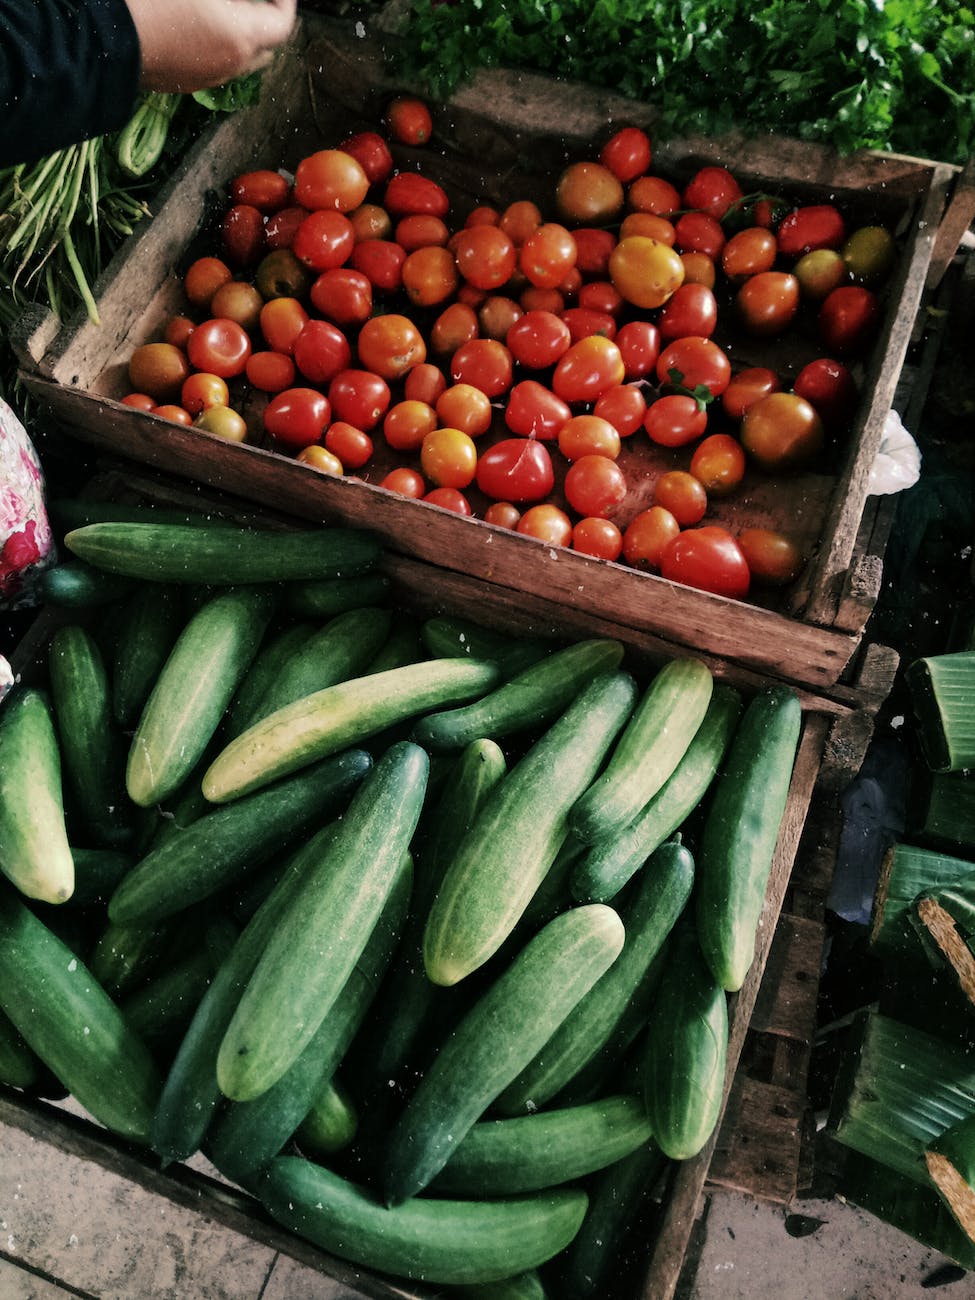 photo of cucumbers and tomatoes in wooden crates